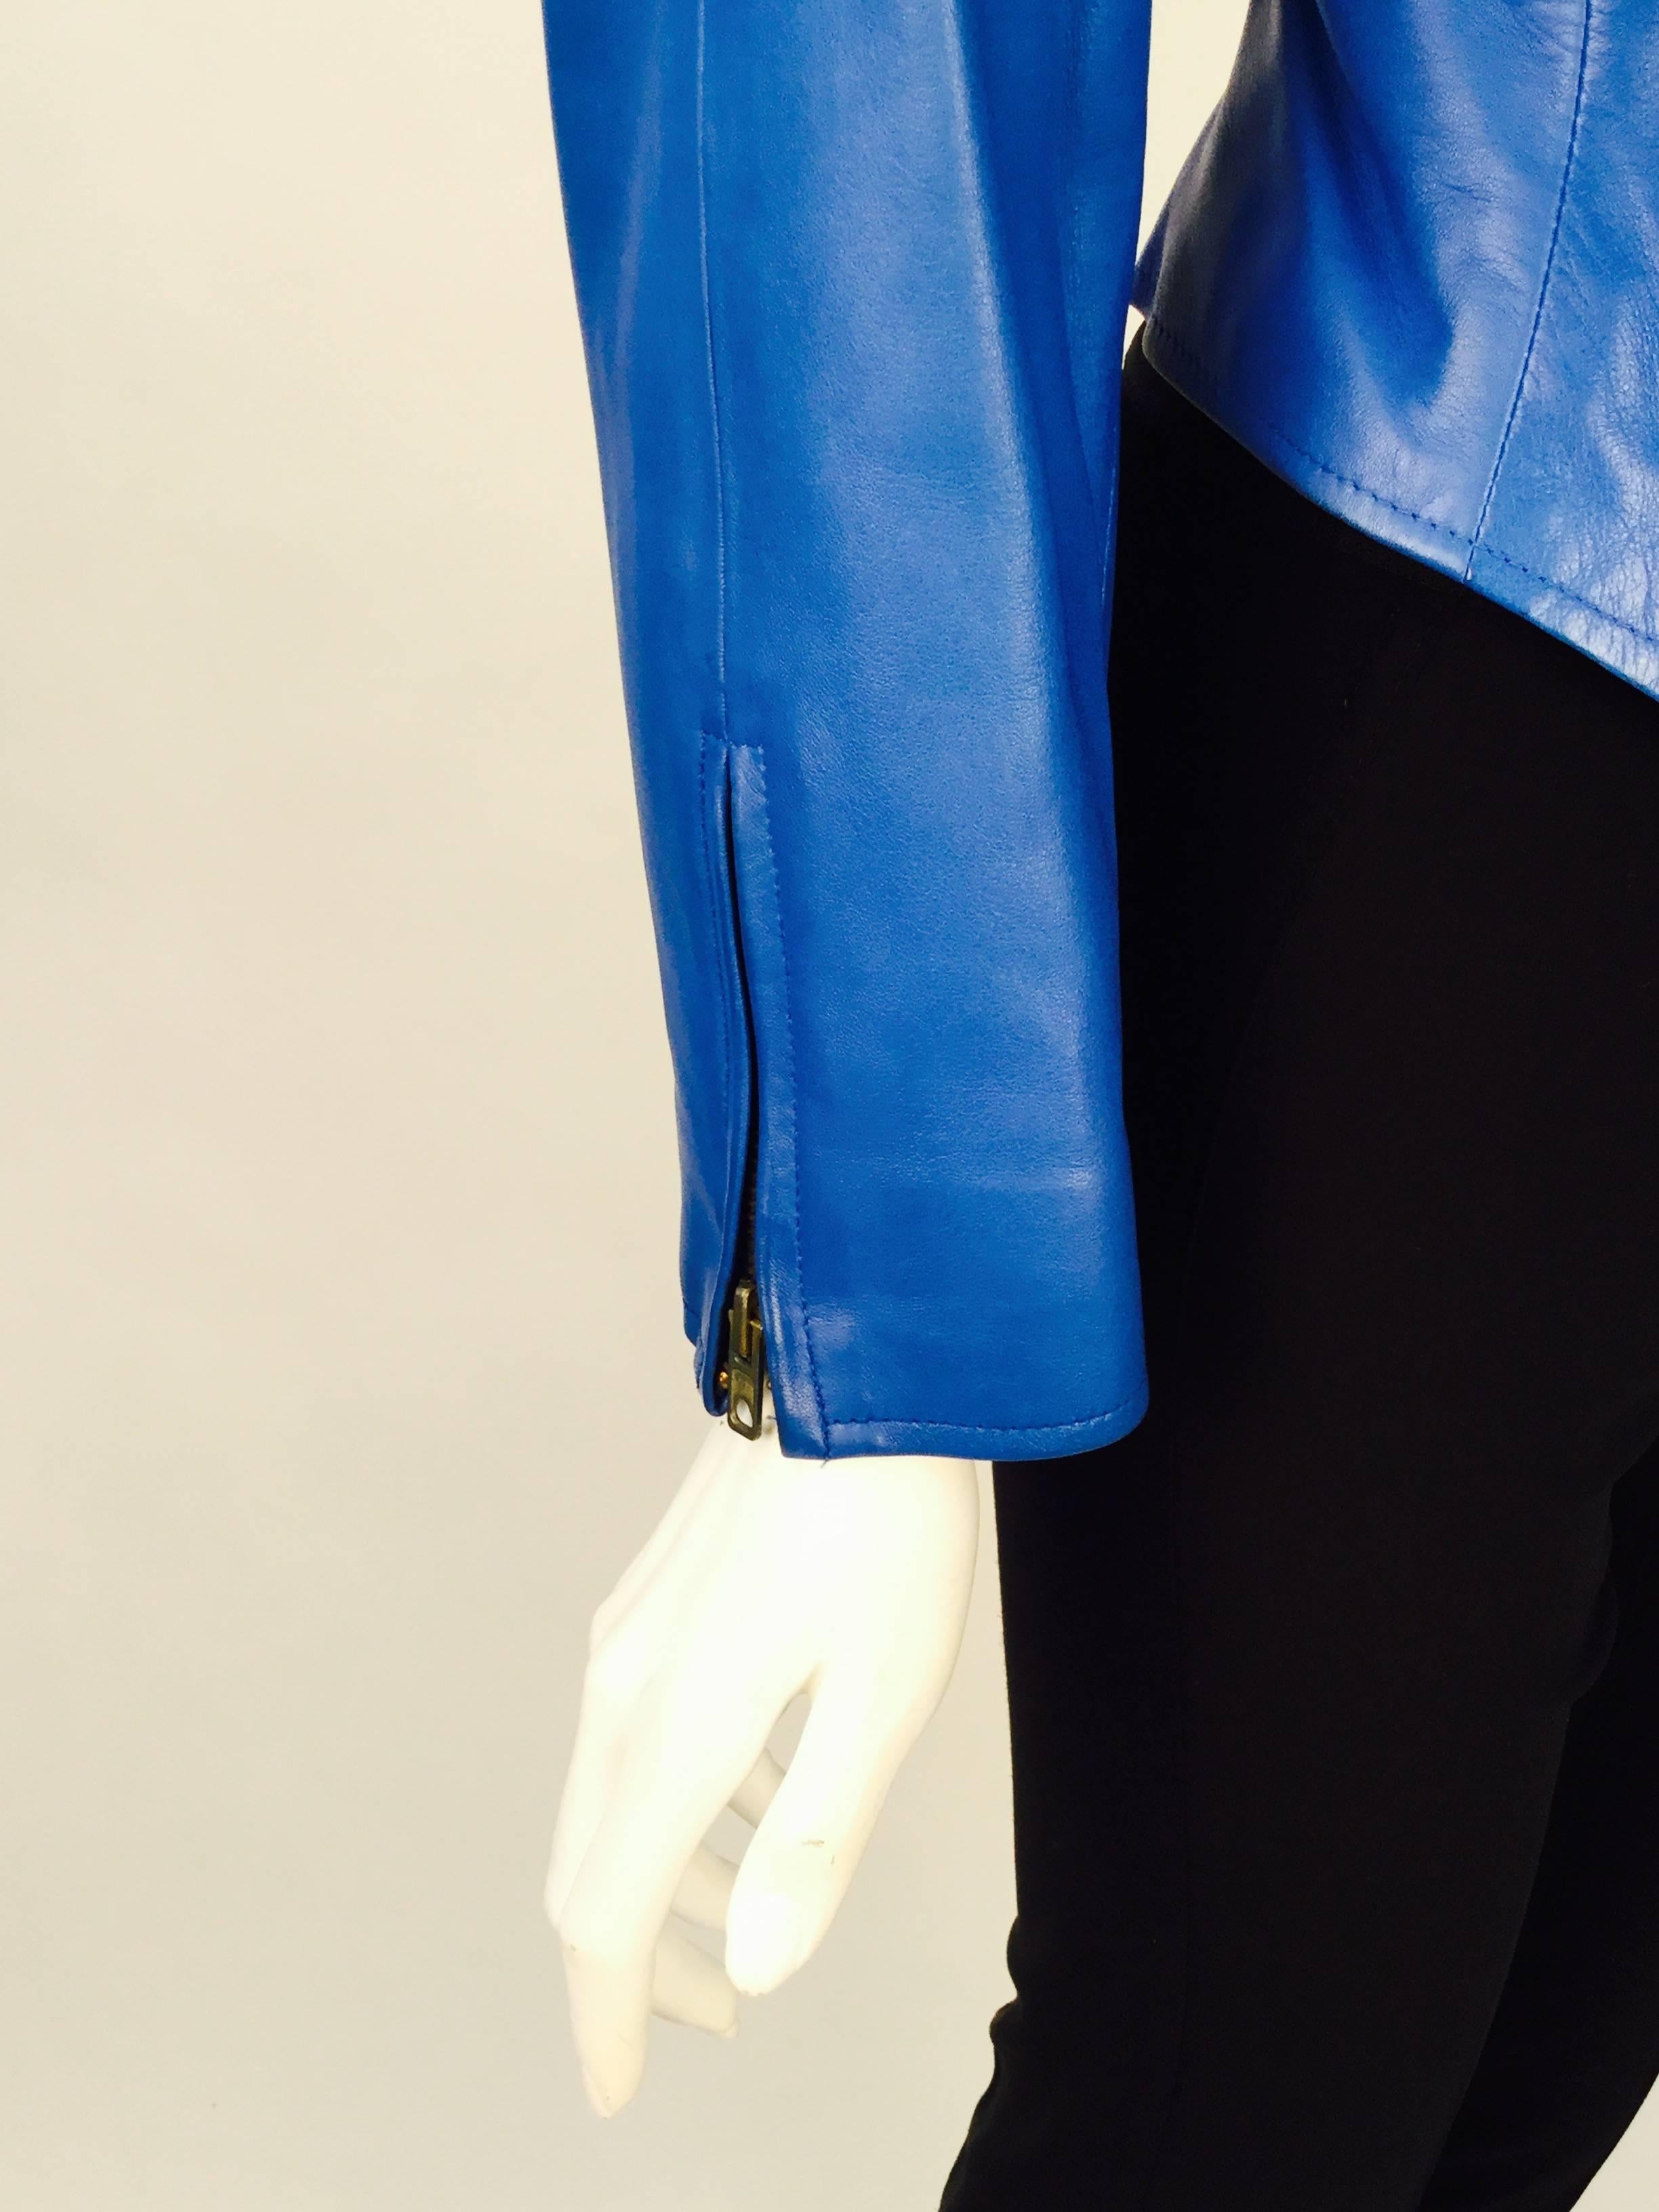 Yves Saint Laurent Blue Leather Jacket and Skirt Ensemble, 1980s  For Sale 1